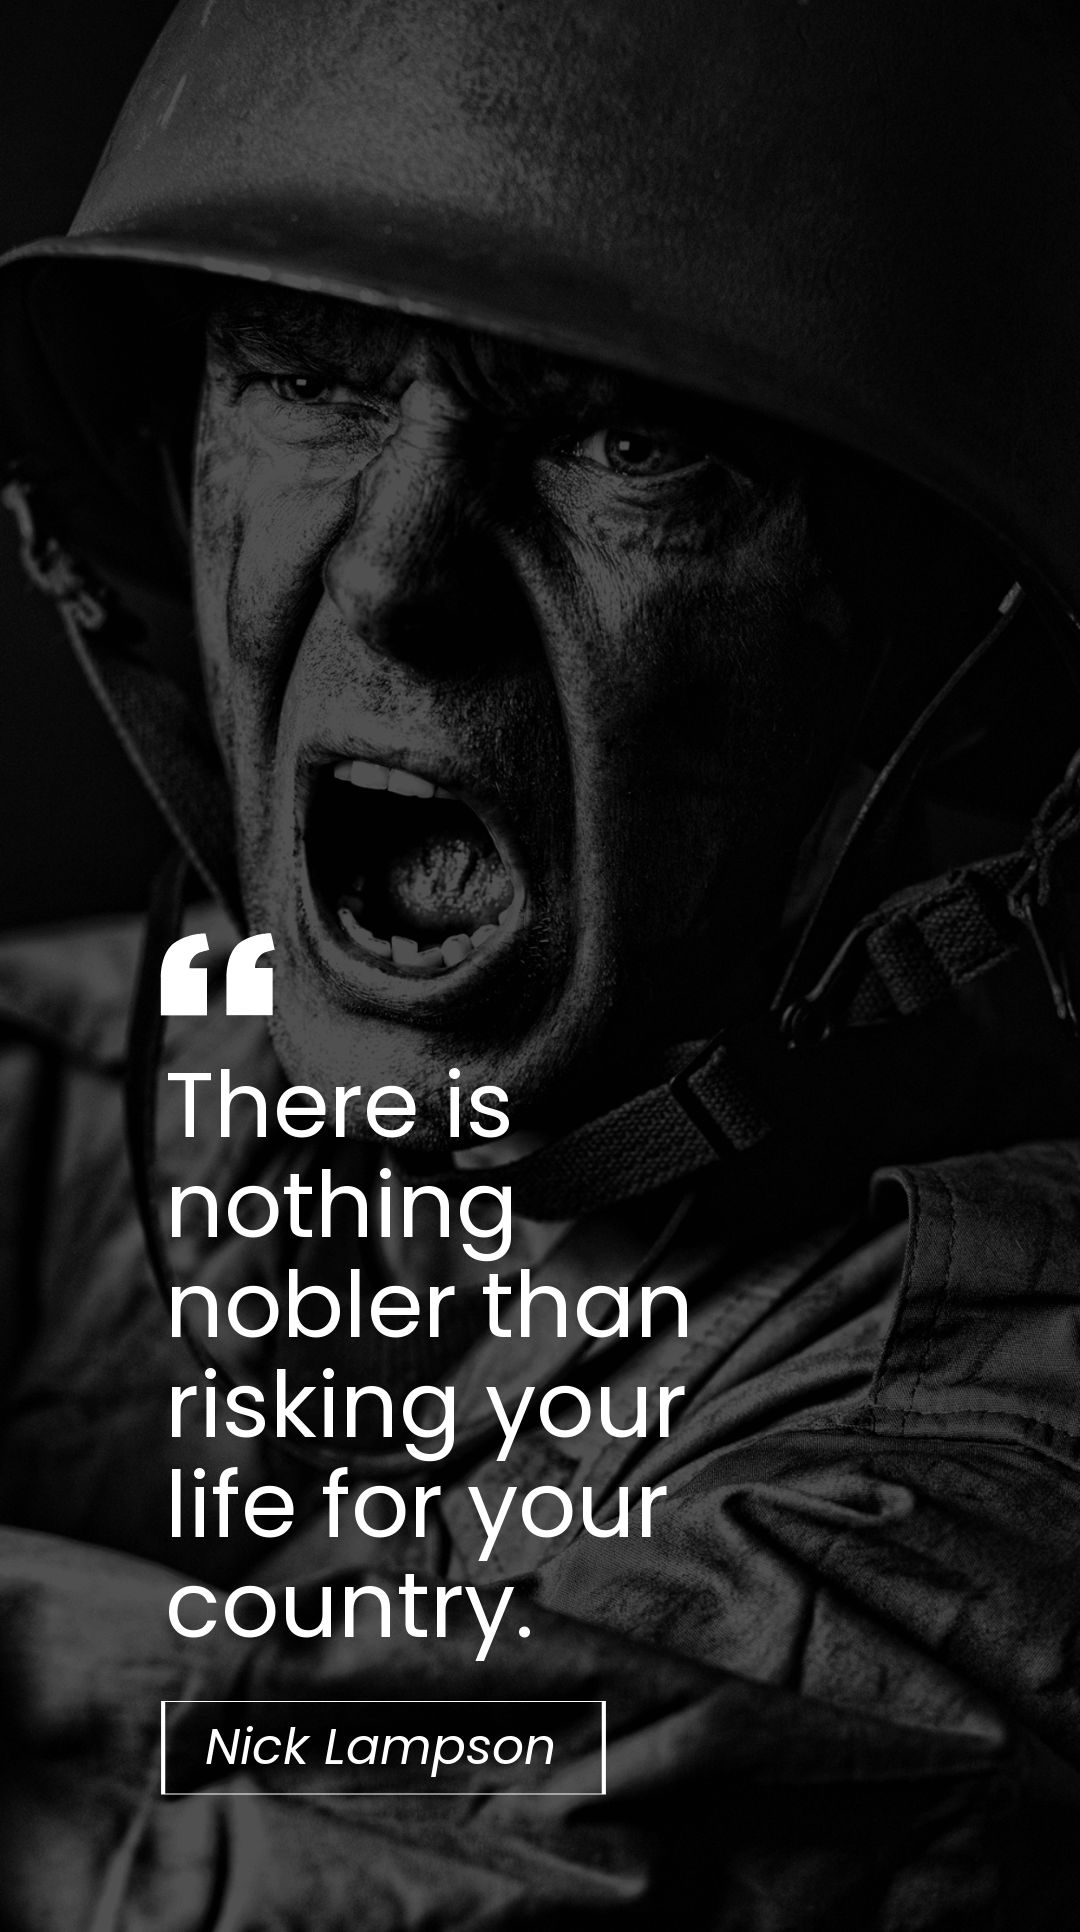 Nick Lampson - "There is nothing nobler than risking your life for your country." in JPG